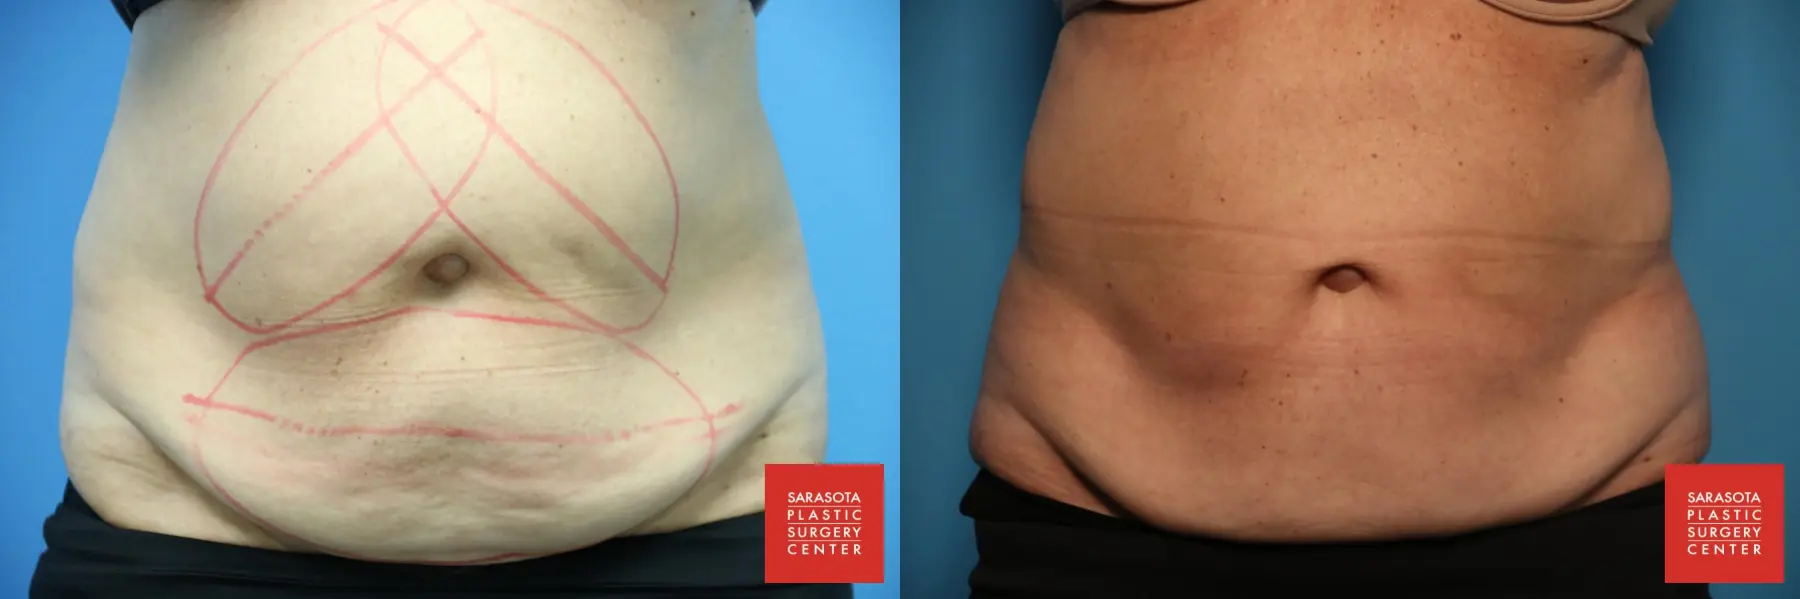 CoolSculpting®: Patient 6 - Before and After 1